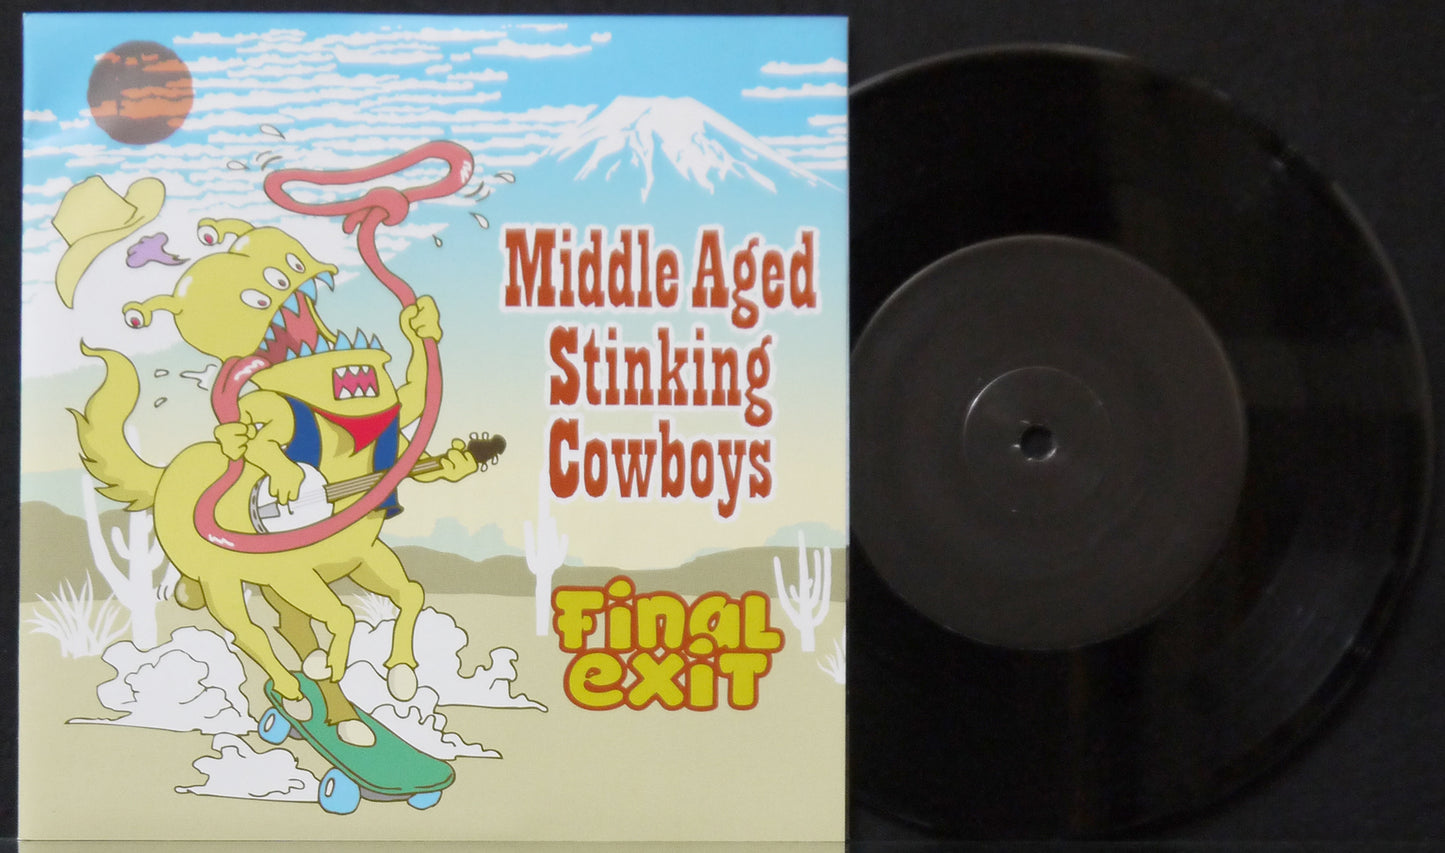 FINAL EXIT - Middle Aged Stinking Cowboys 7"